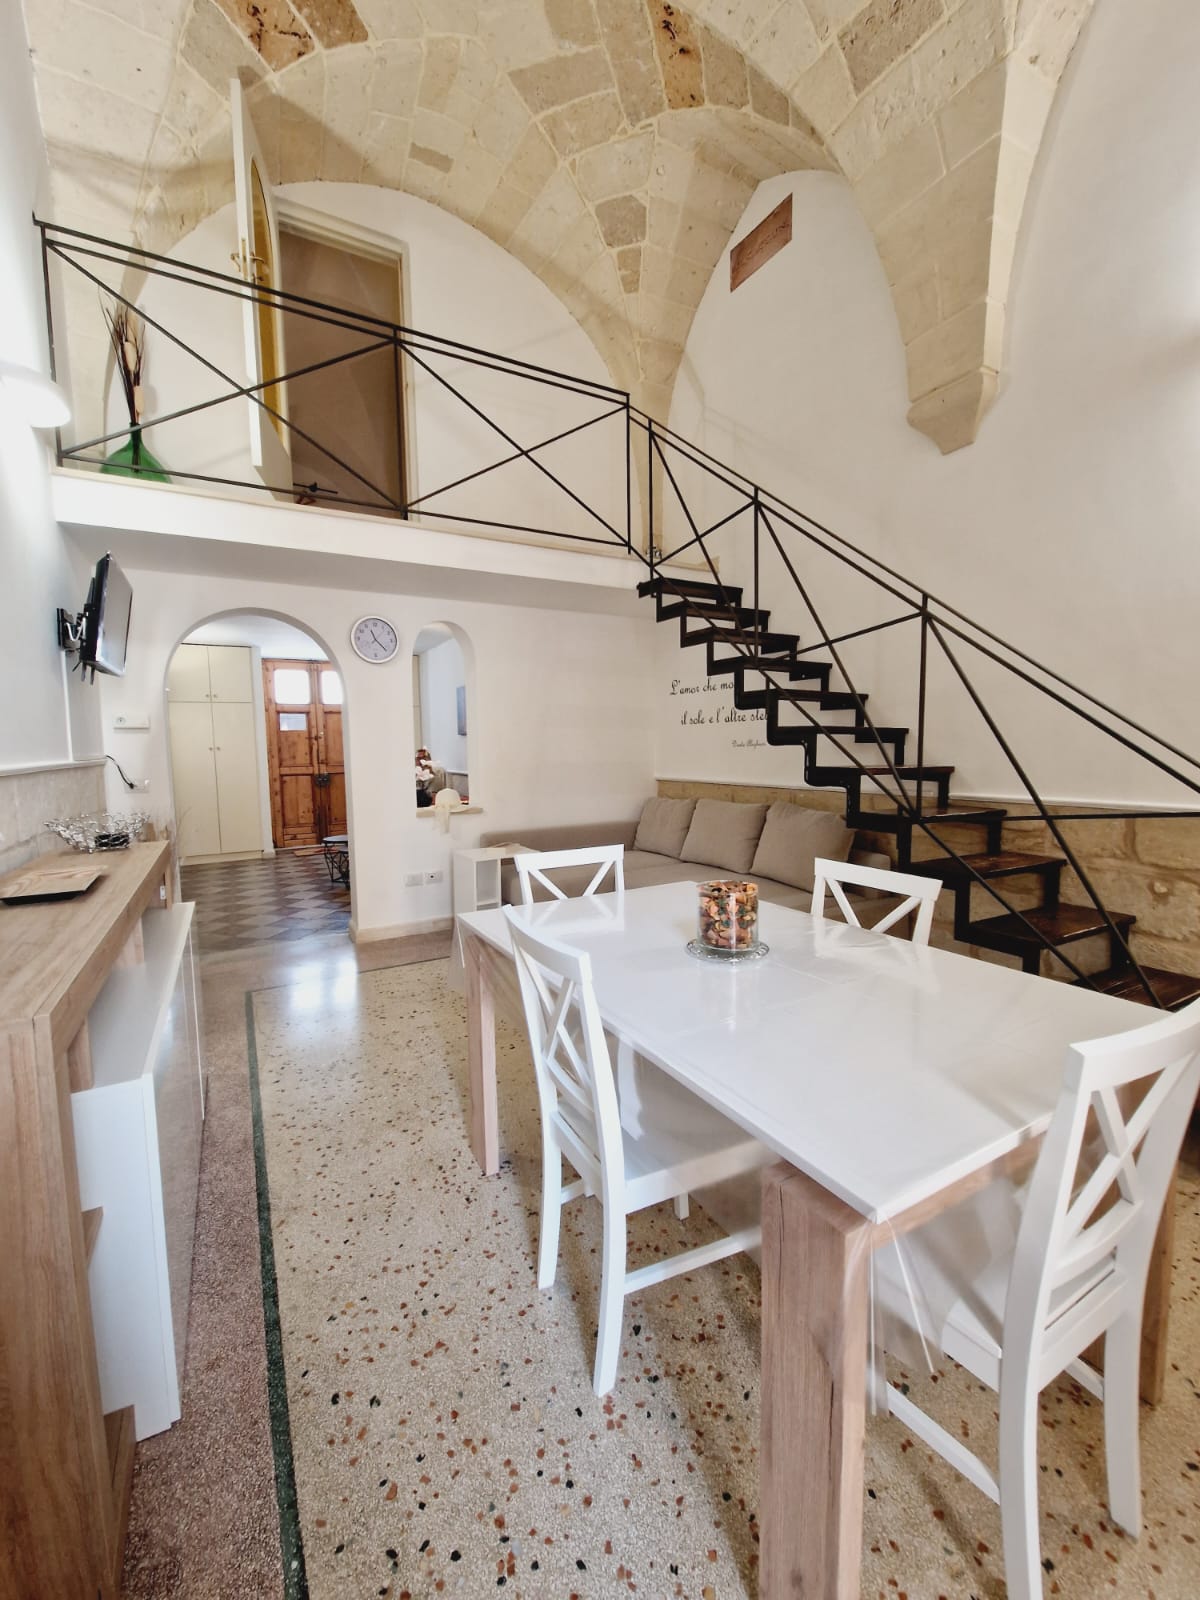 CASA DANTE - Vacation homes for Rent in Lecce, Puglia, Italy, Italy - Airbnb